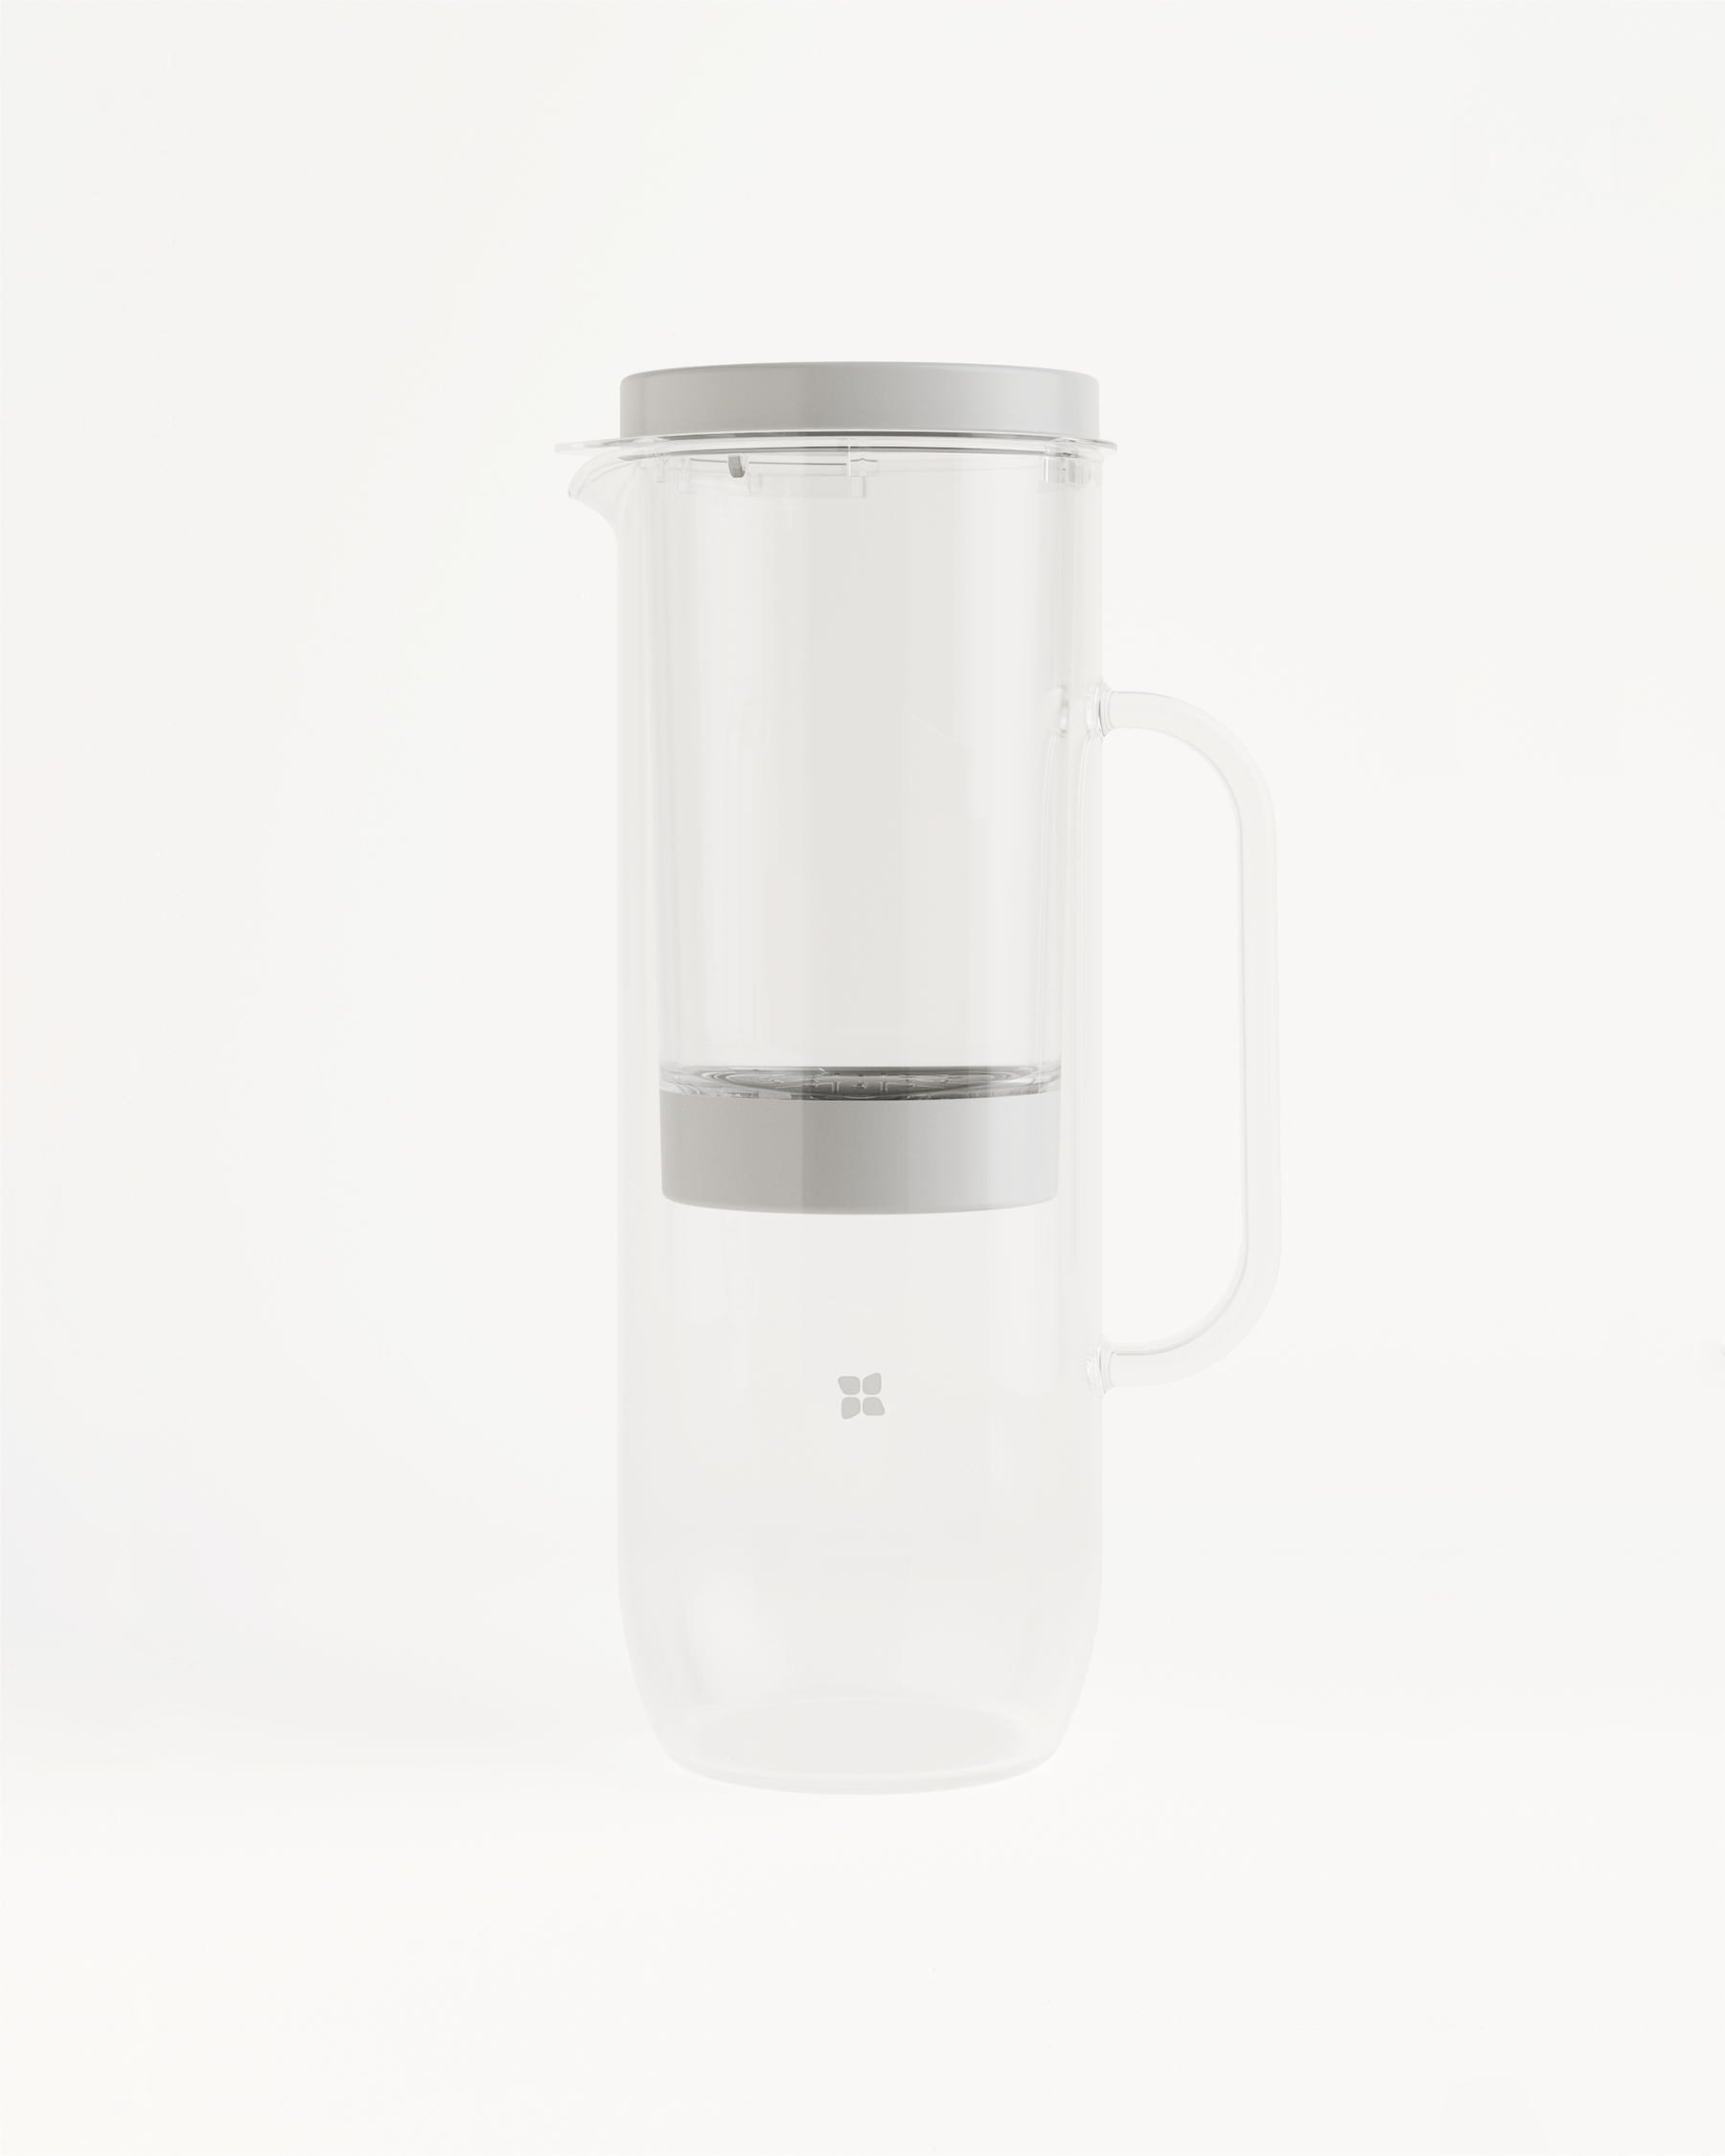 LUCY® Filter Carafe